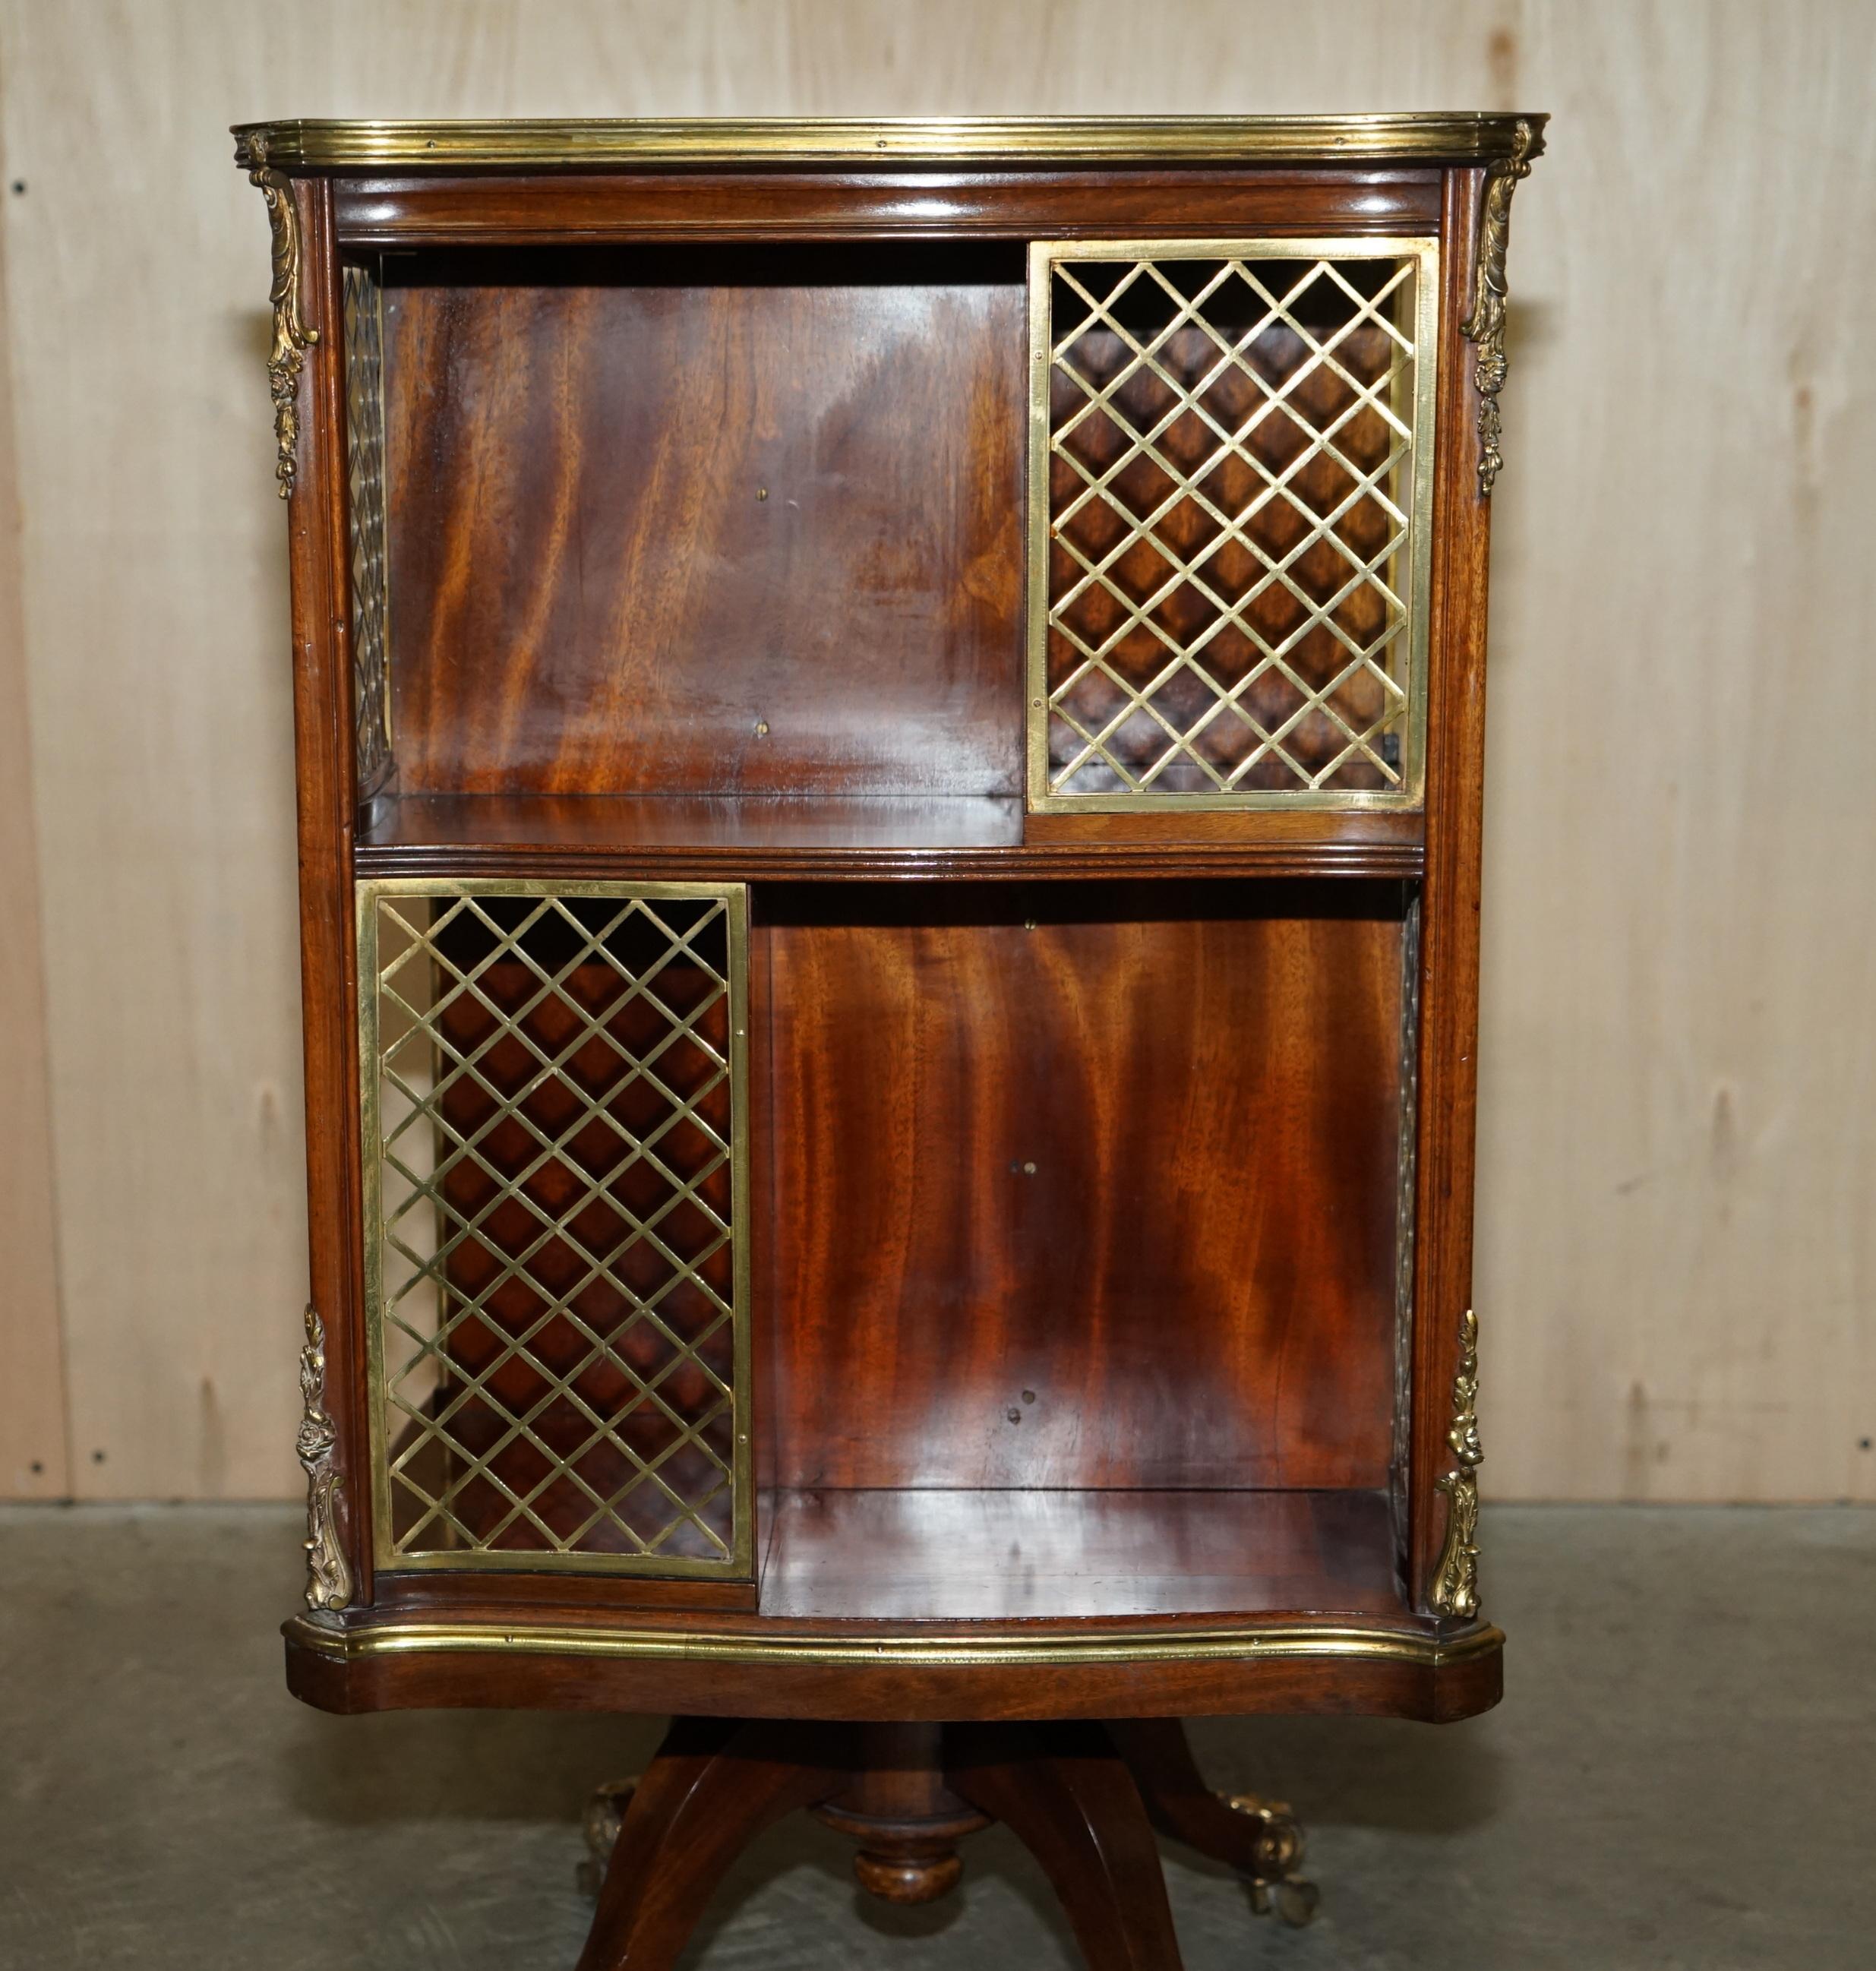 Hand-Crafted Important Antique Regency circa 1810 Brass & Walnut Revolving Bookcase Table